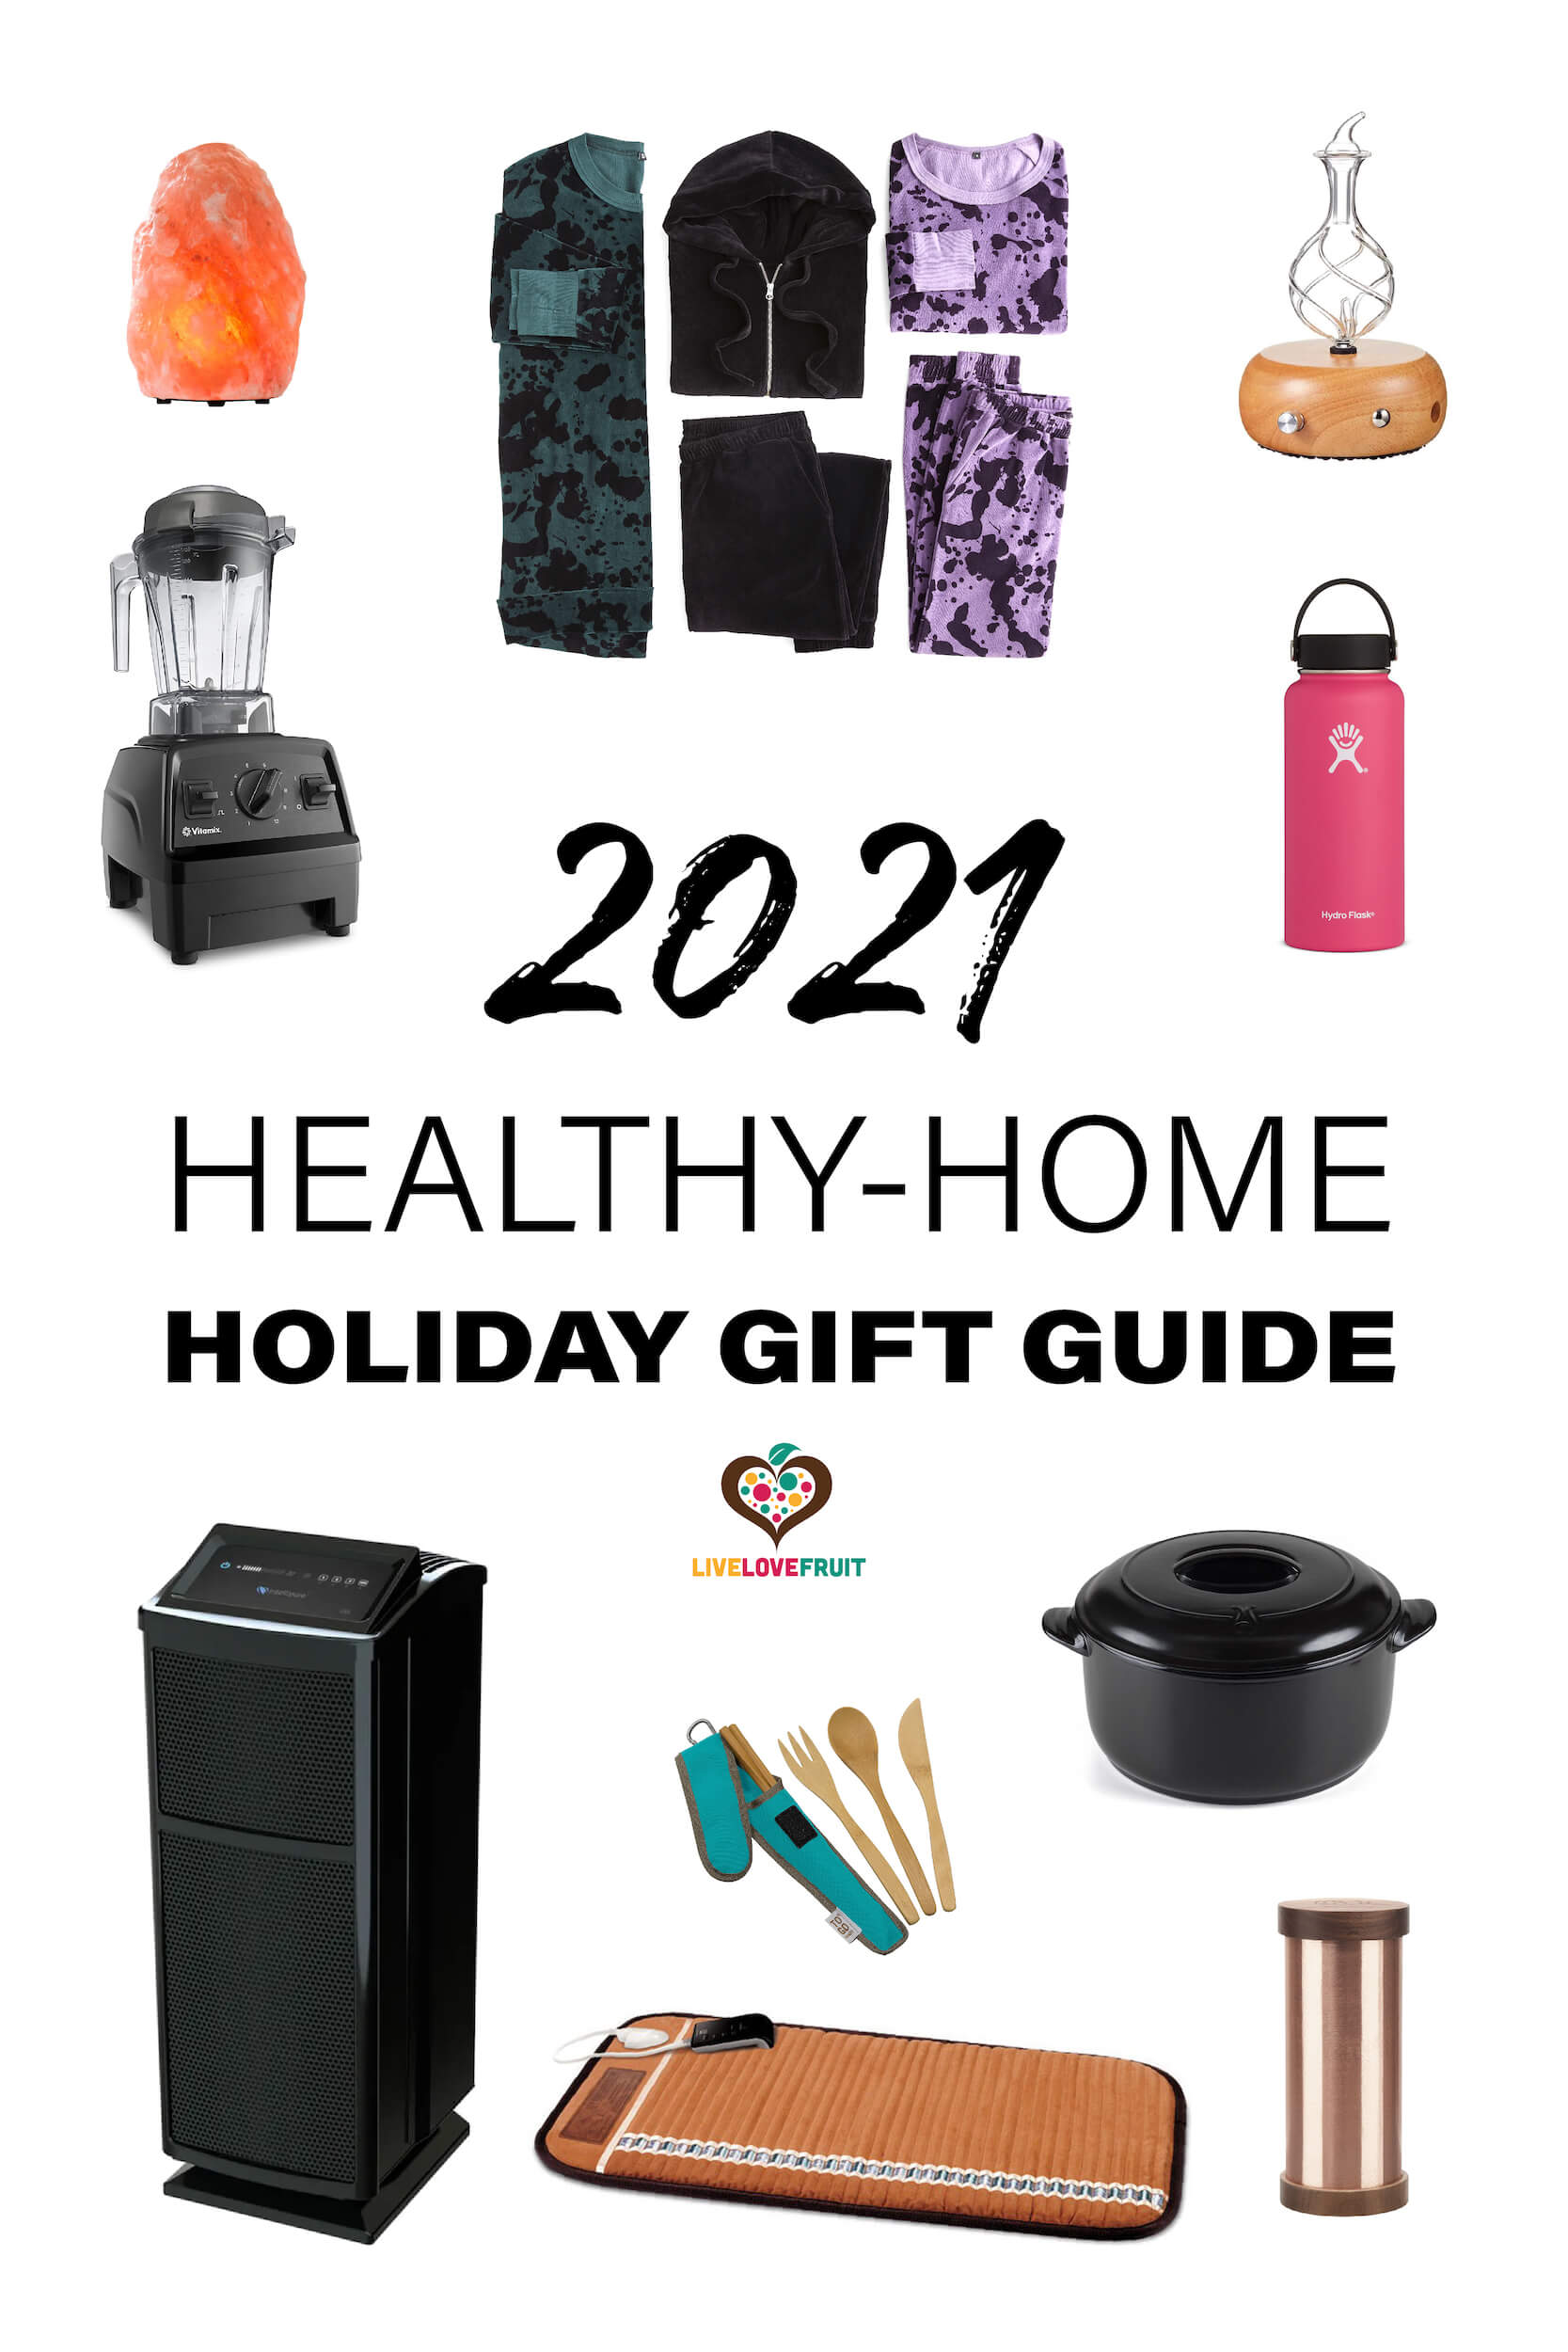 2021 healthy home gift guide with icons of various gifts